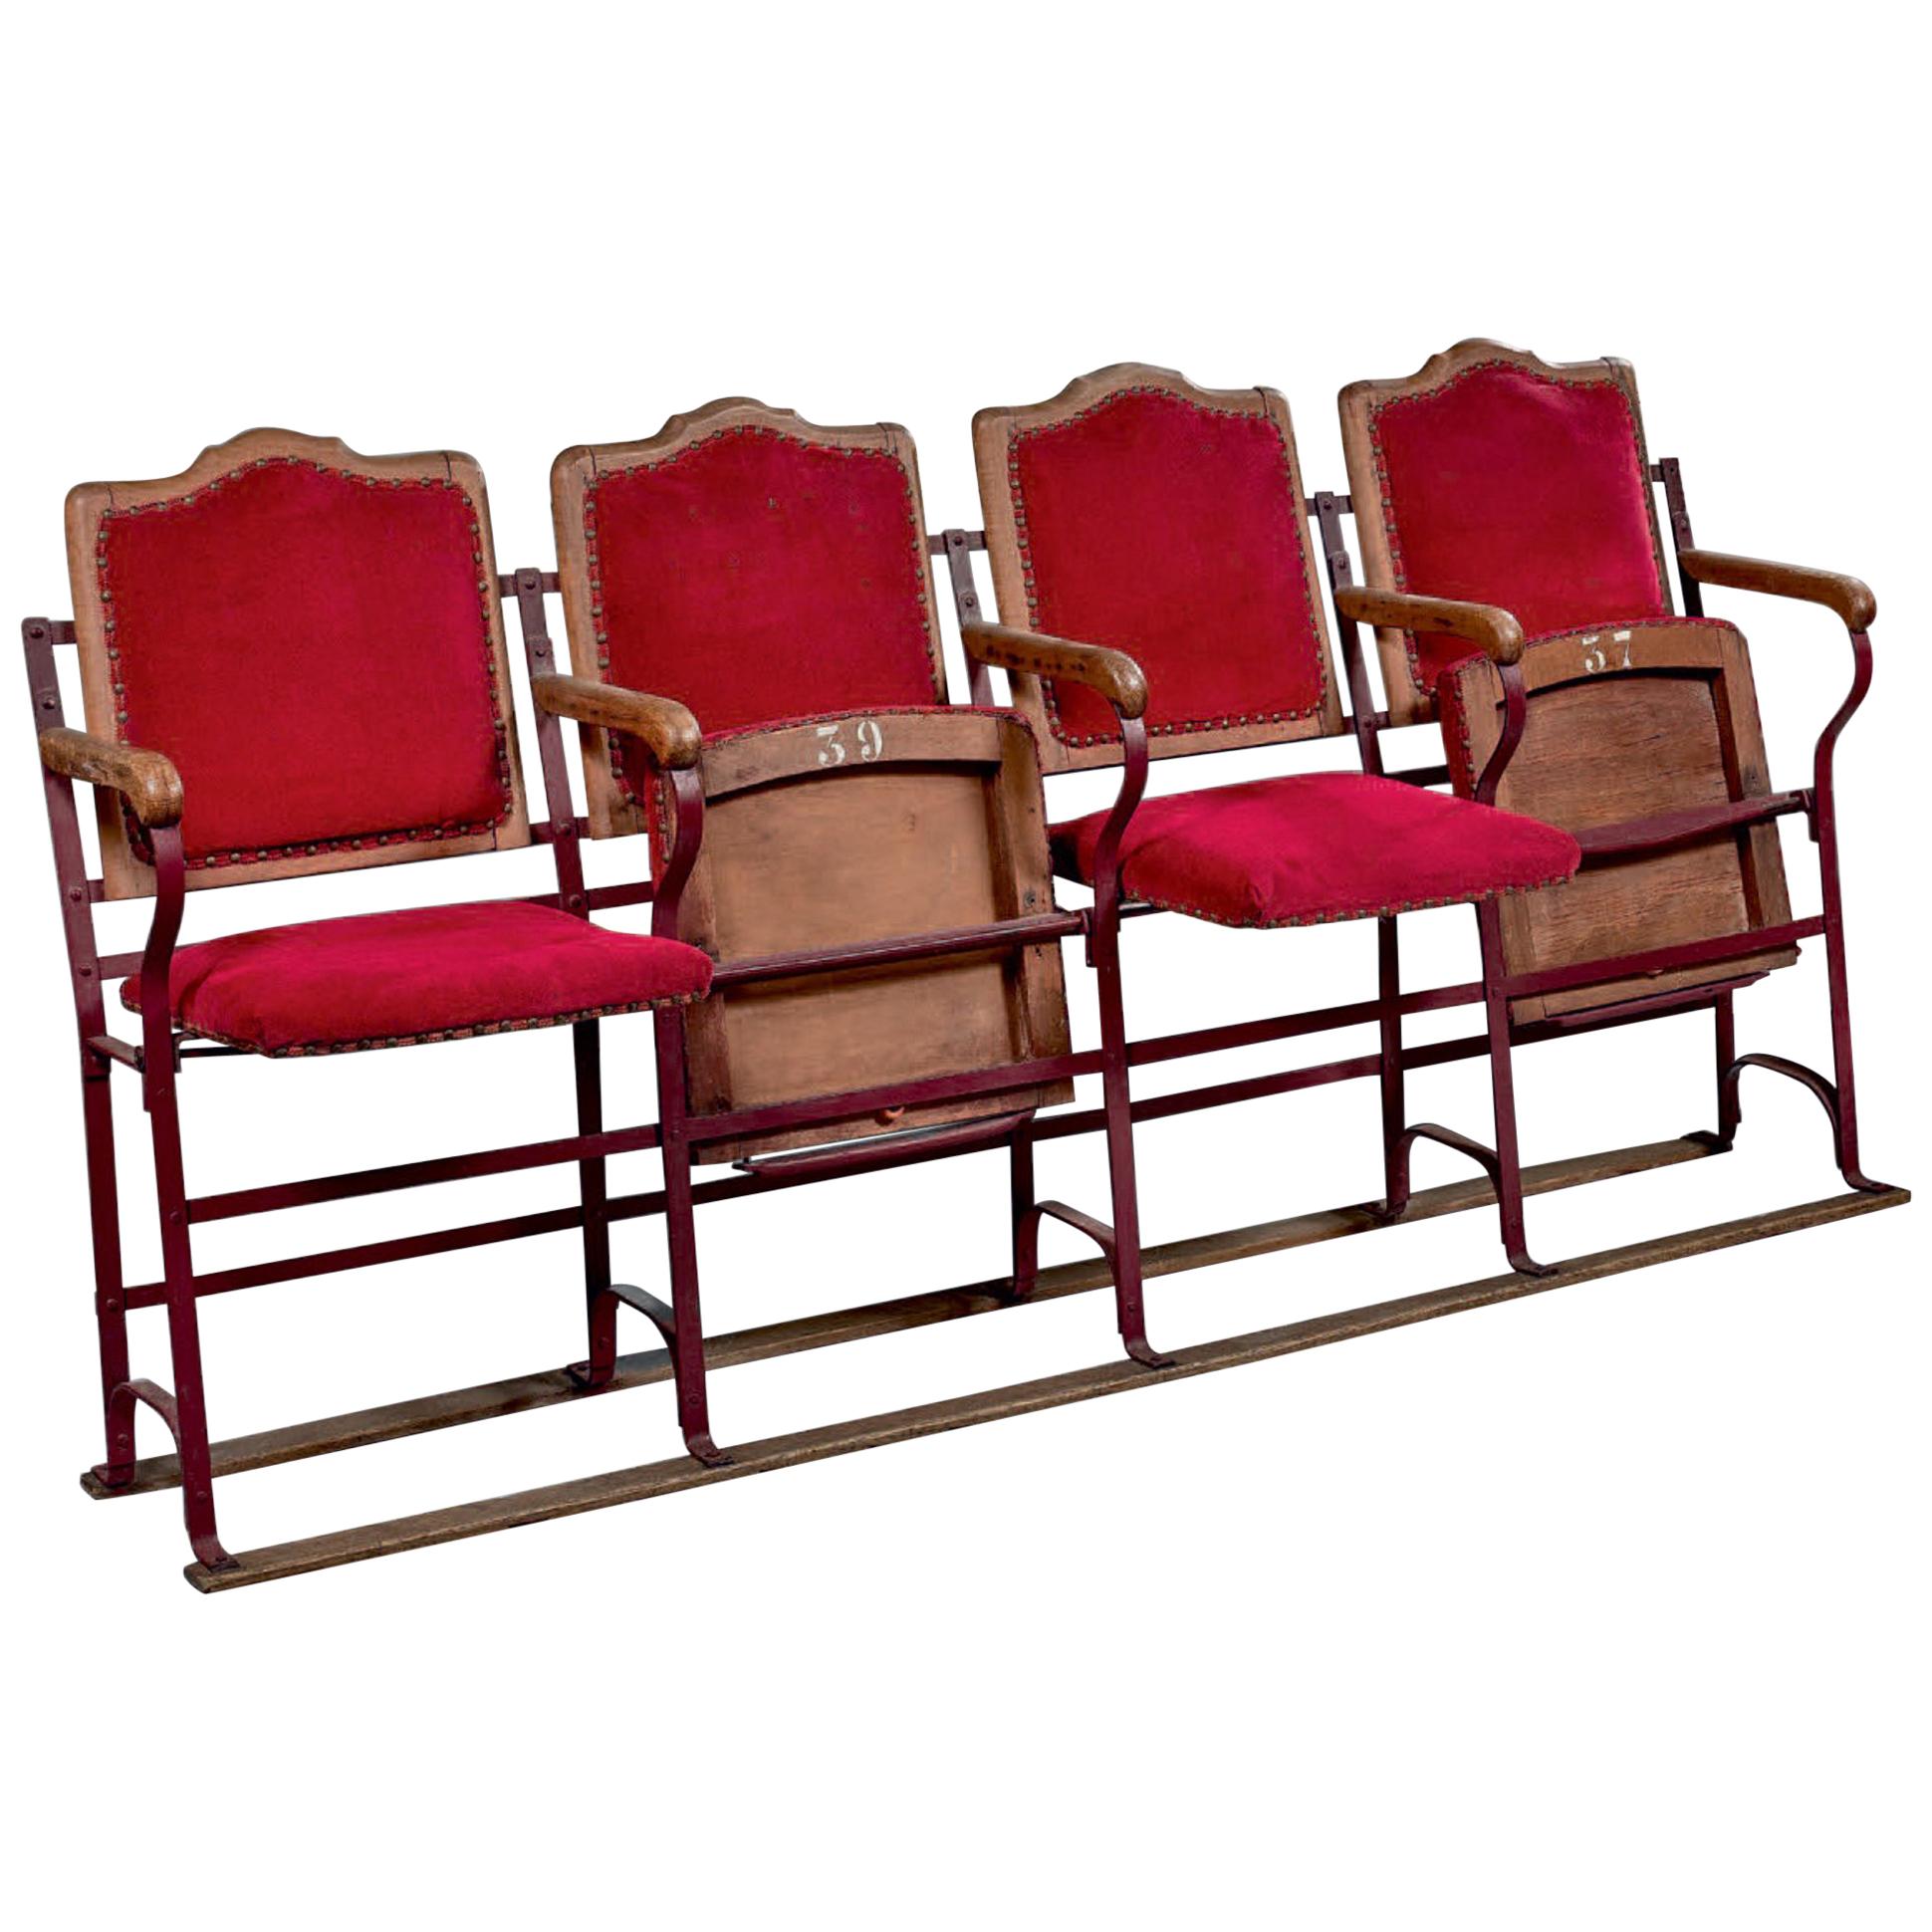 20th Century French Four Seater Cinema Seats in Wood and Metal in Red Velvet